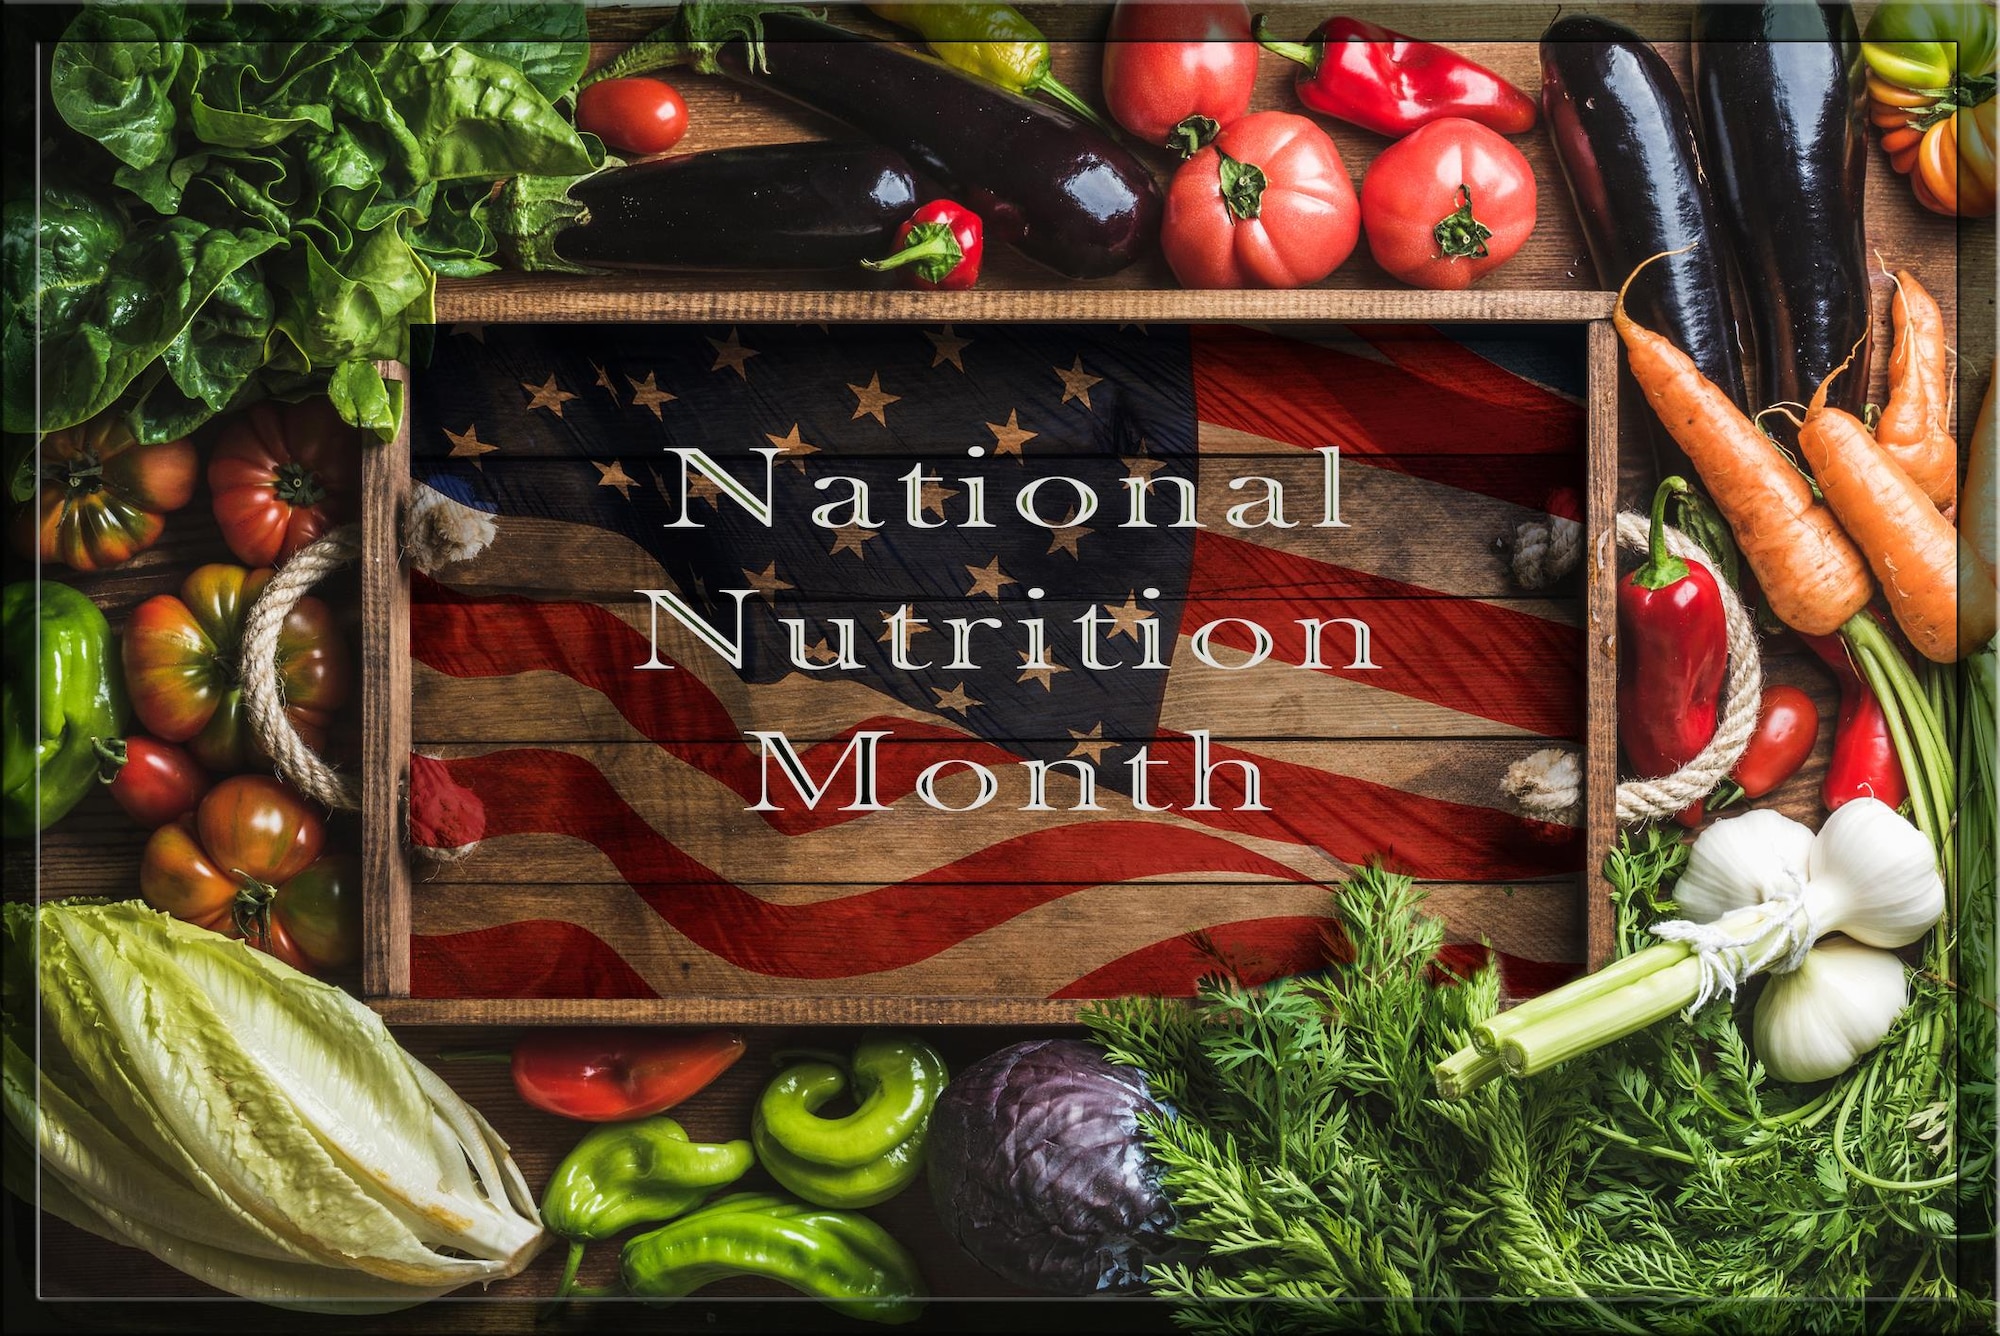 March is National Nutrition Month and this year’s theme is “Put Your Best Fork Forward,” which encourages a return to the basics of healthy eating. (U.S. Air Force graphic by Lino Espinoza)